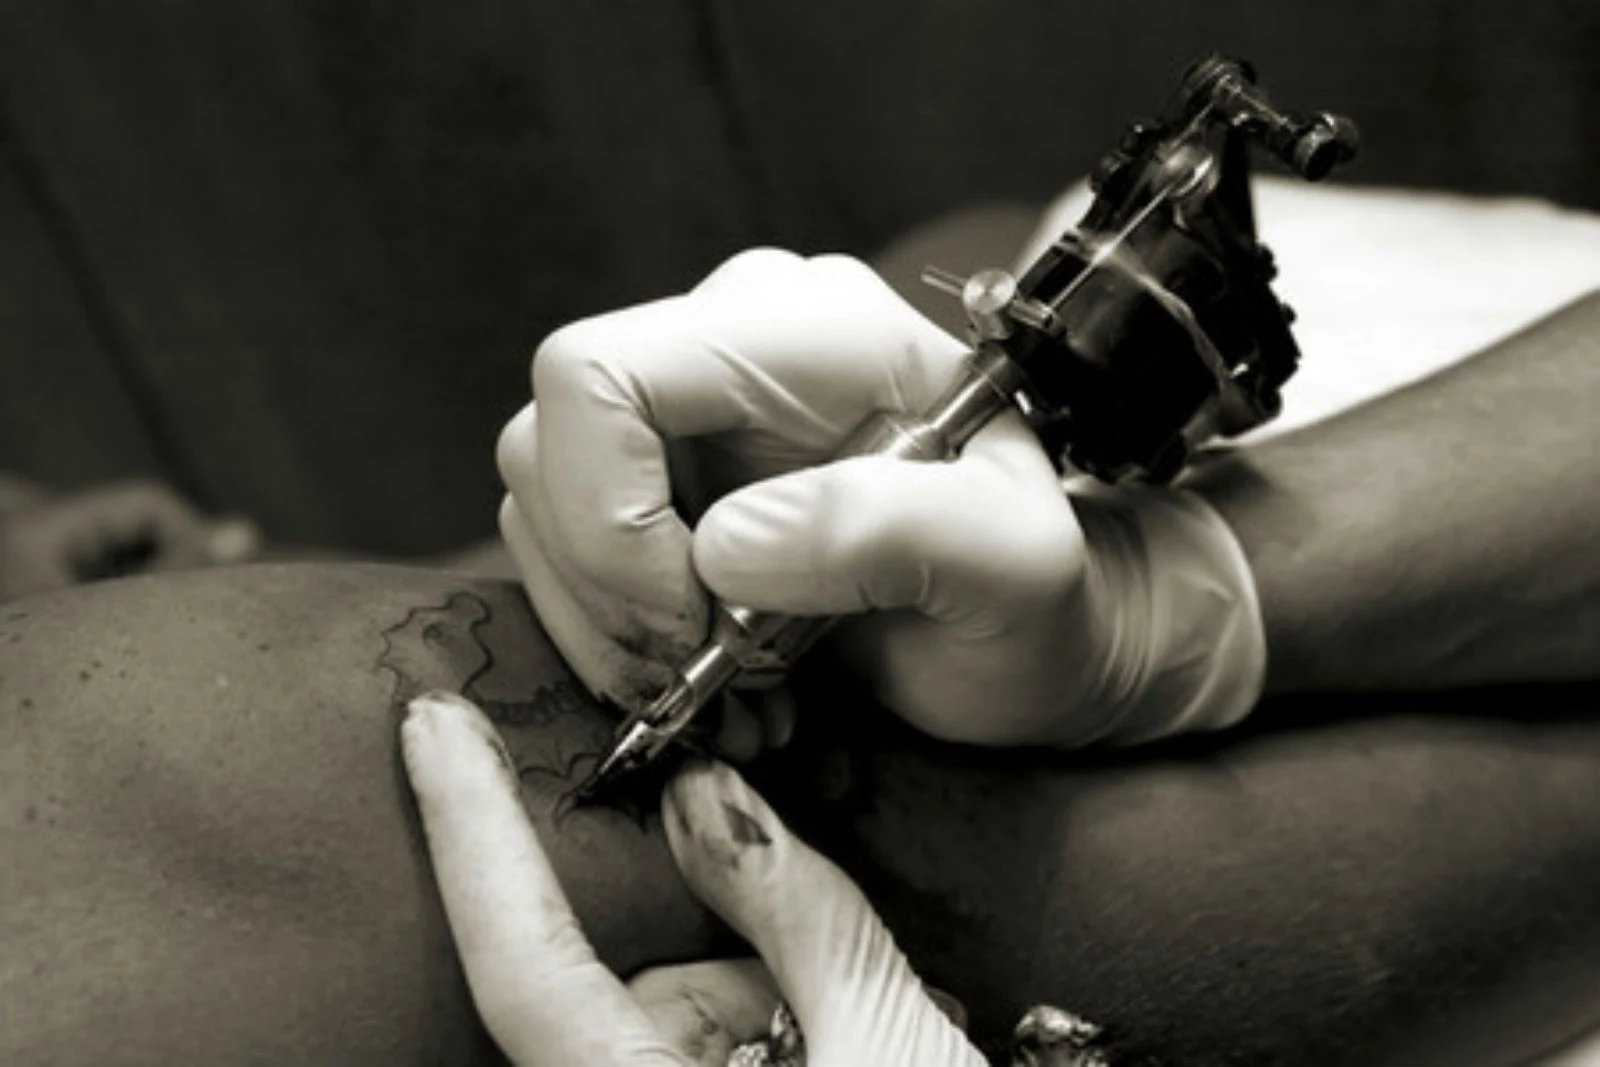 What is a tattoo you would like to have, but is fully outside of your  comfort zone? - Quora